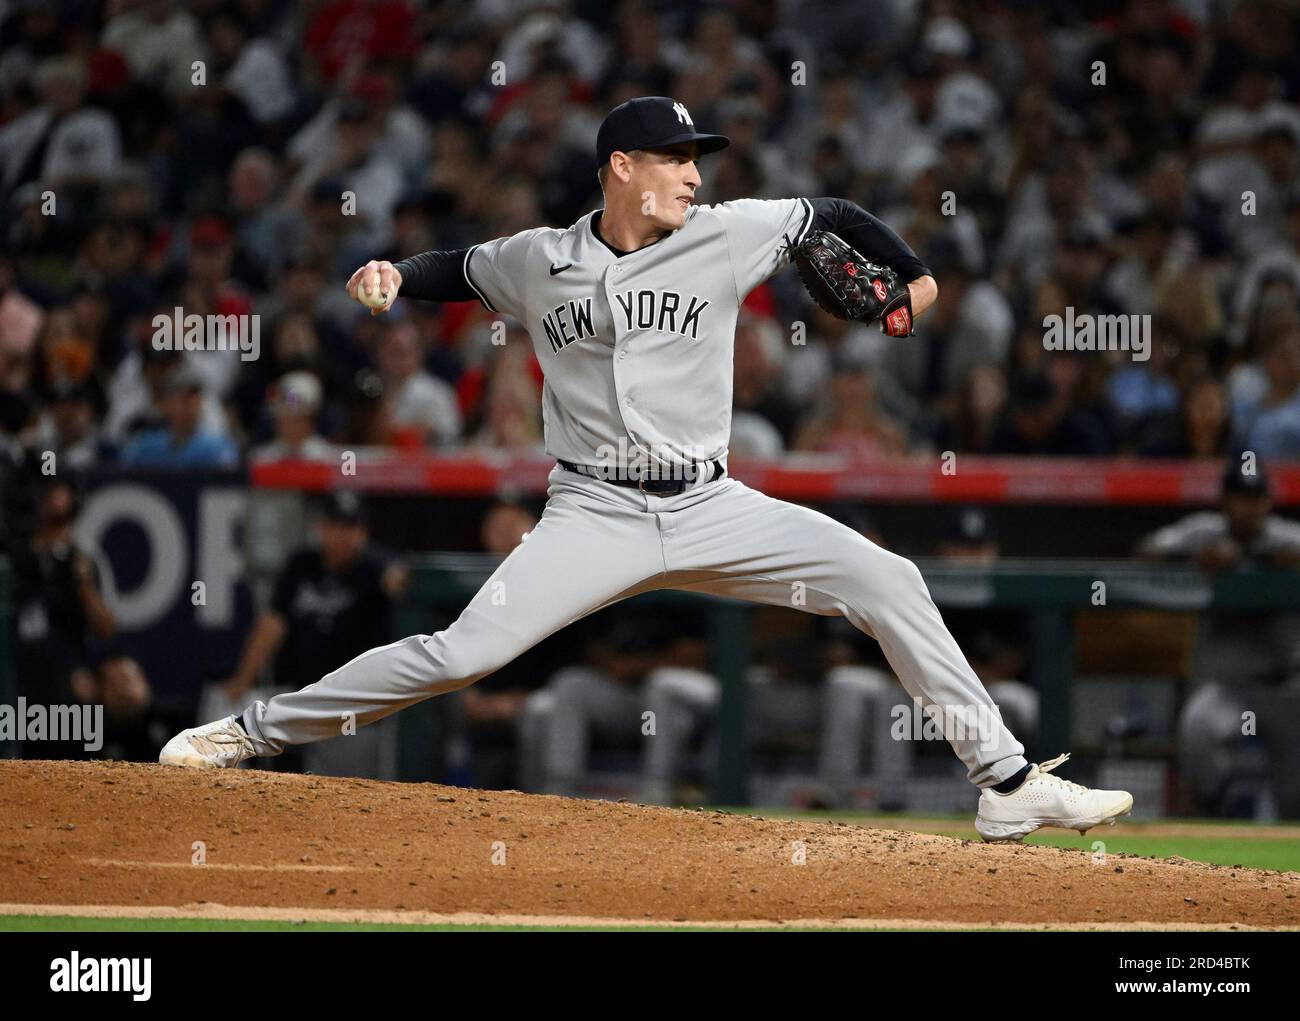 ANAHEIM, CA - JULY 17: New York Yankees pitcher Ron Marinaccio (97)  pitching during an MLB baseball game against the Los Angeles Angels played  on July 17, 2023 at Angel Stadium in